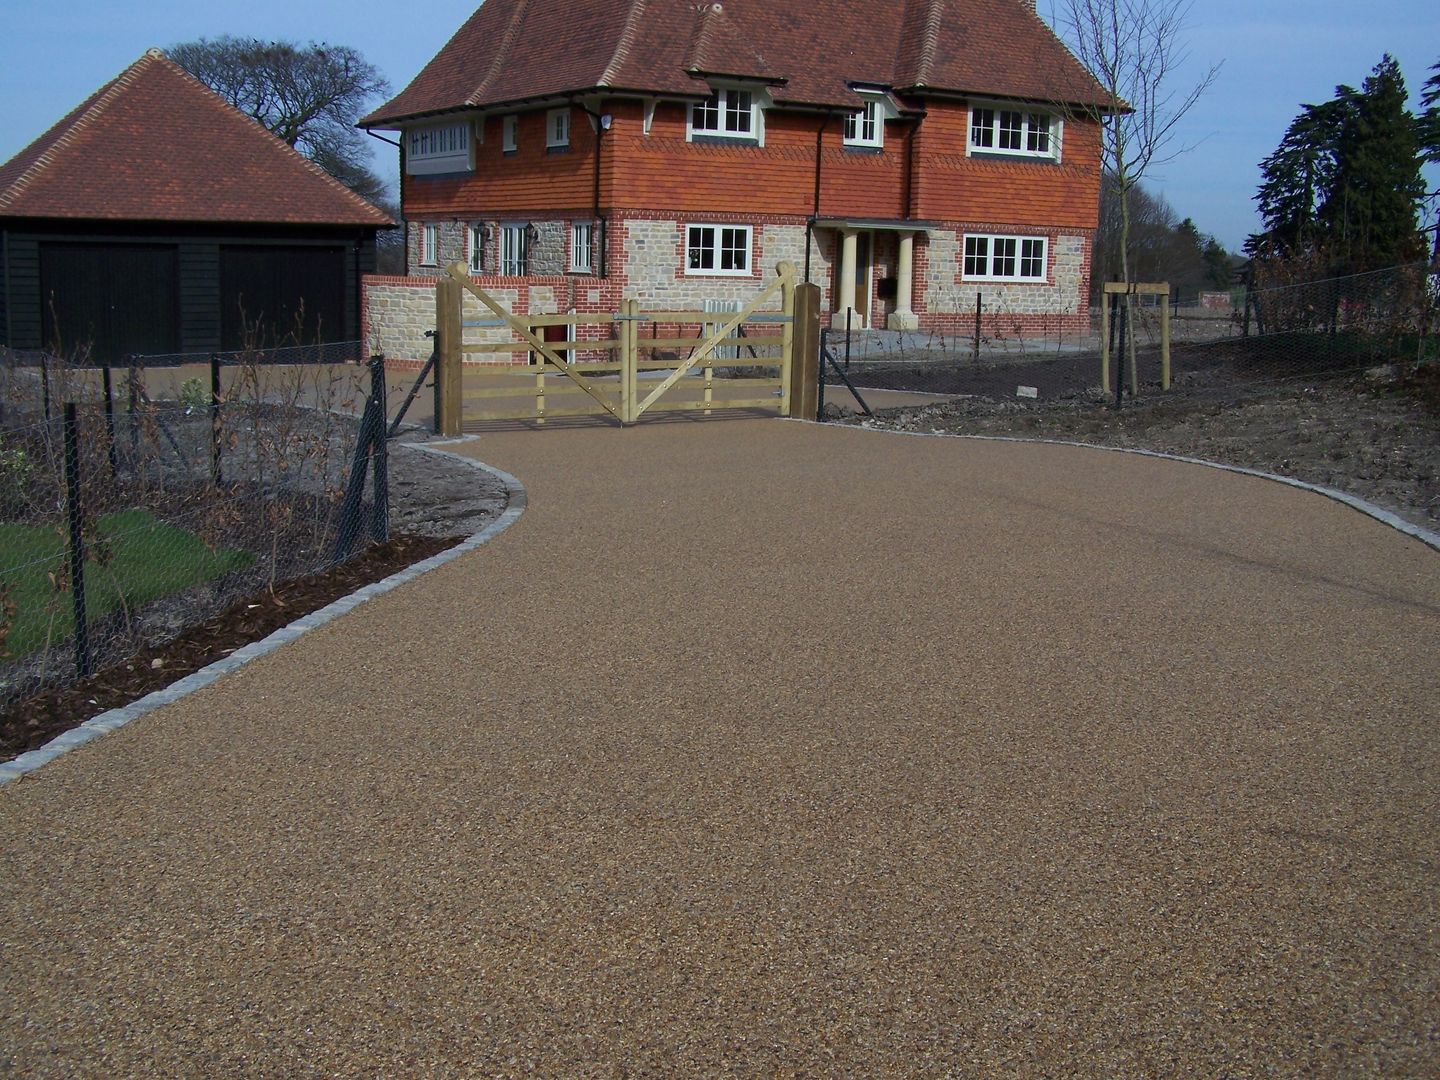 Domestic Driveways installation of resin bound paving, Permeable Paving Solutions UK Permeable Paving Solutions UK Paredes y pisos de estilo rústico